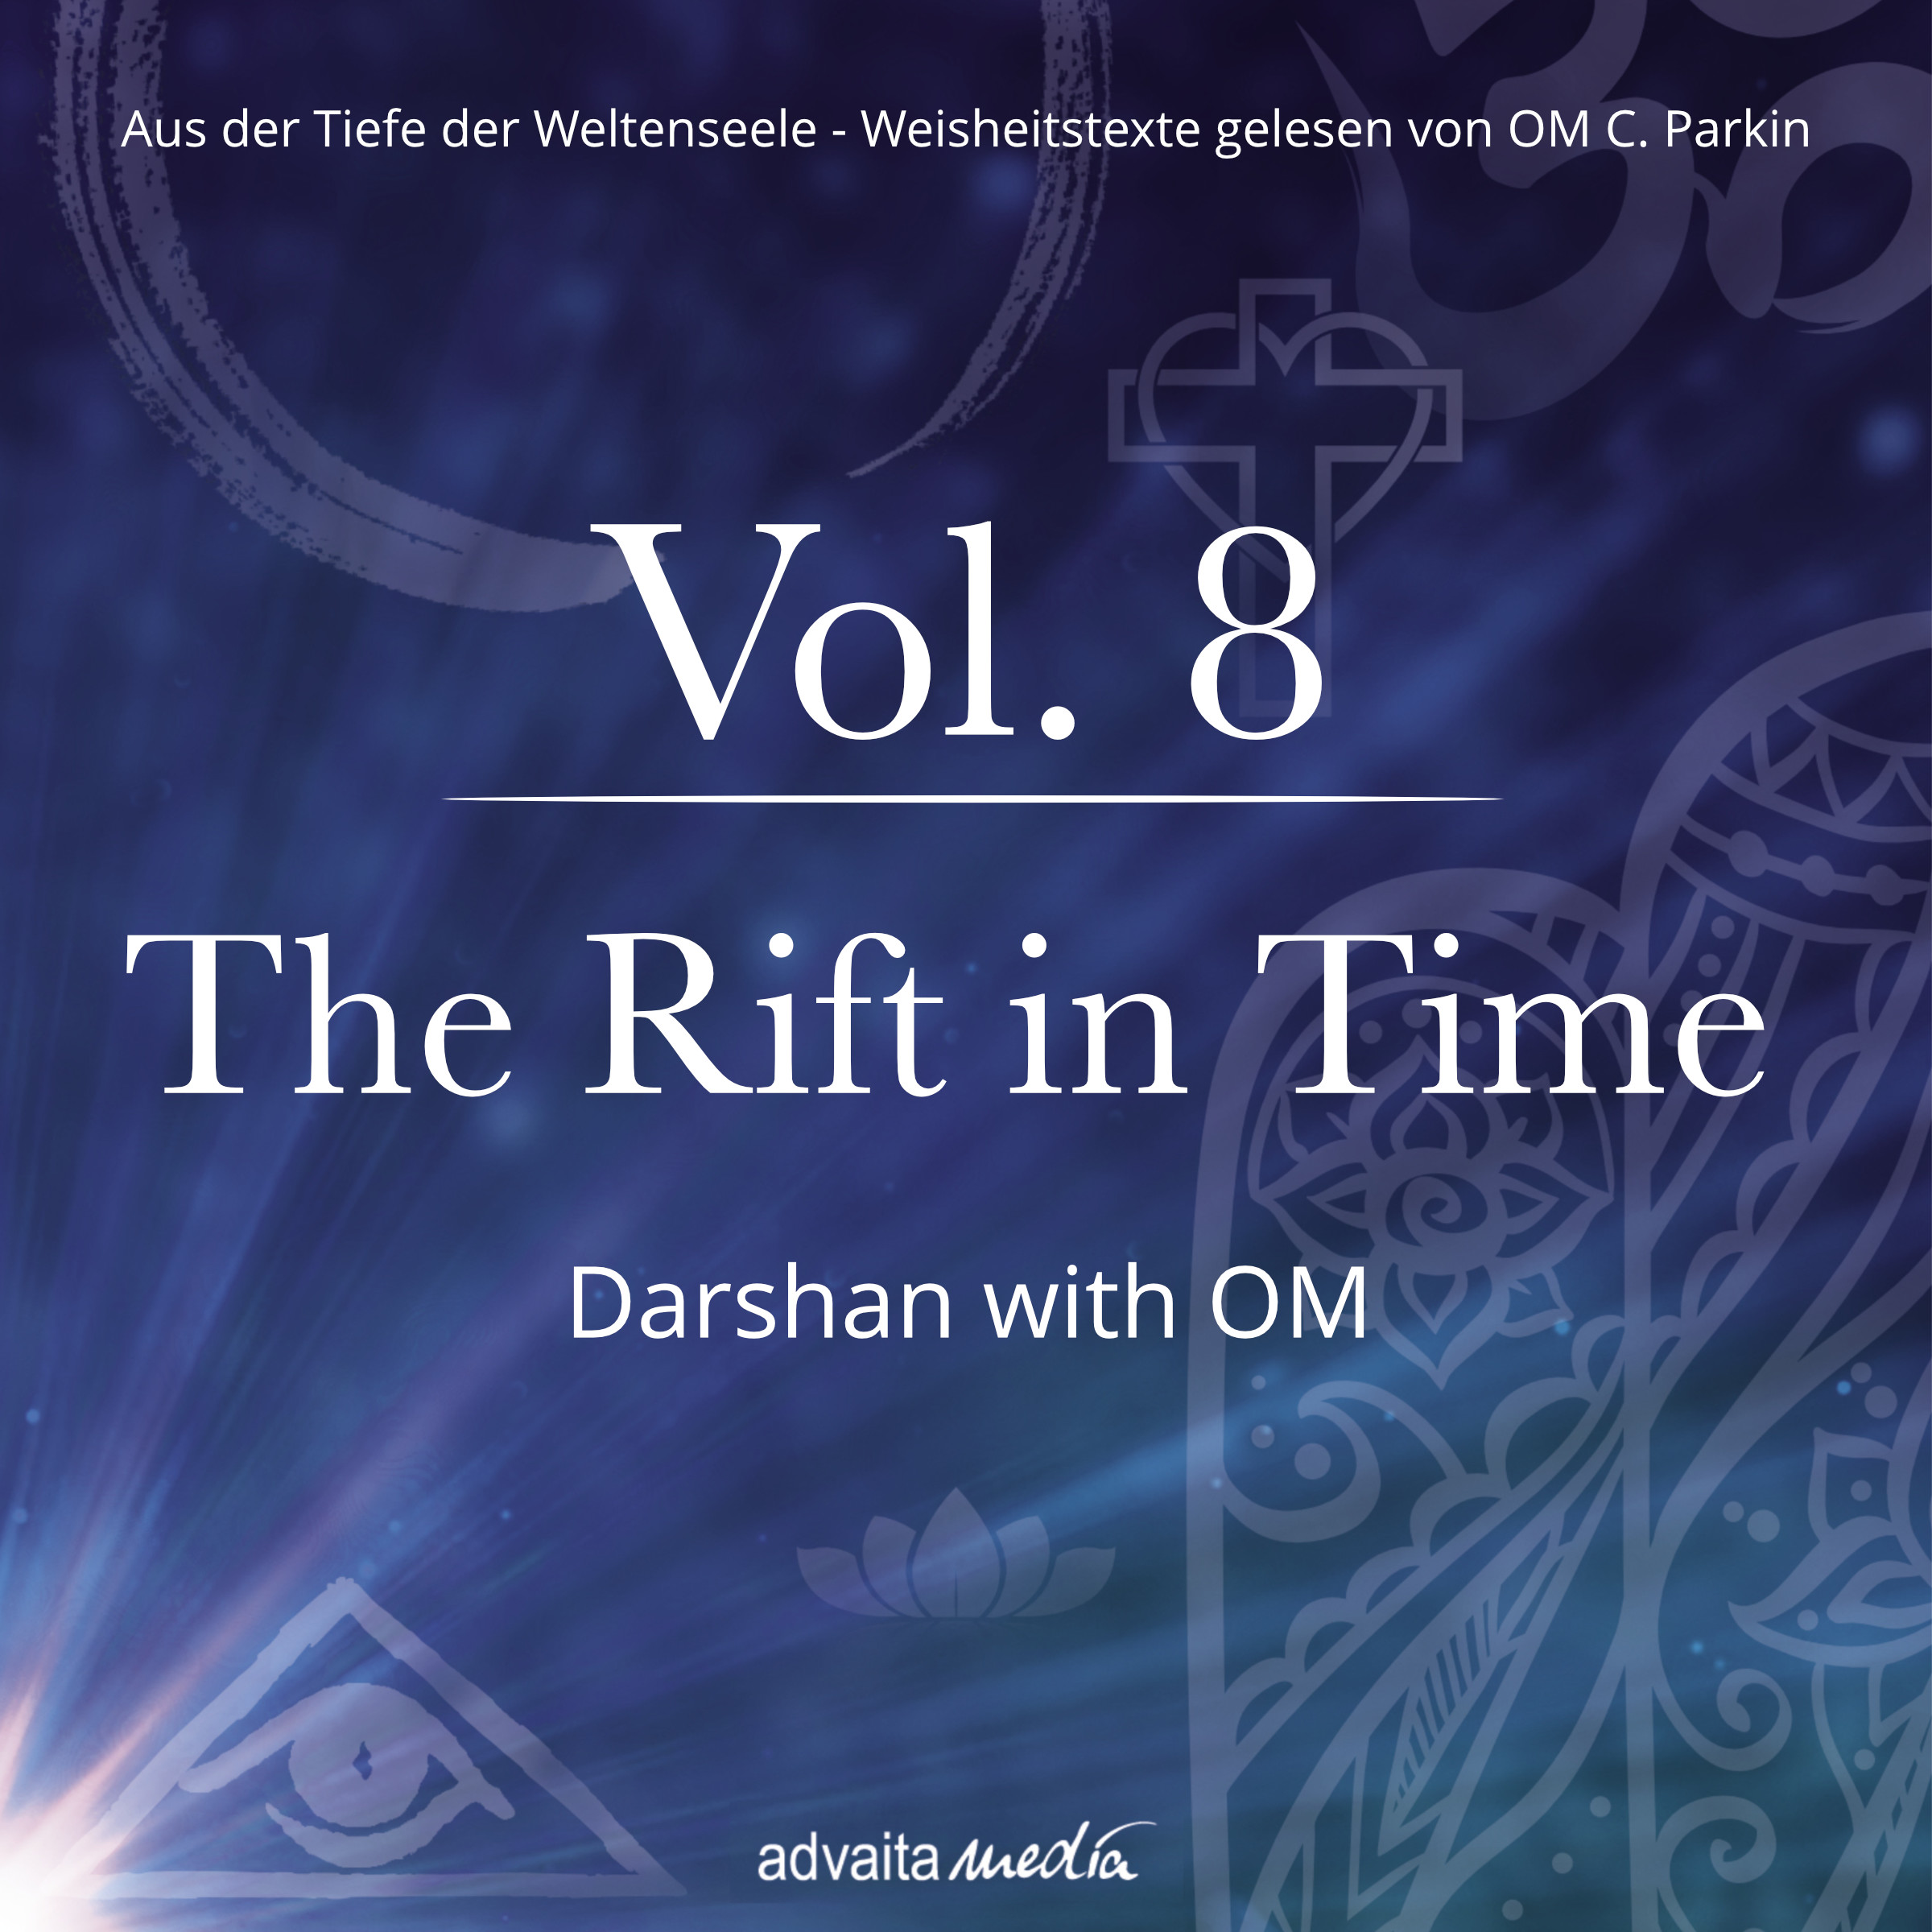 The Rift in Time - Darshan with OM